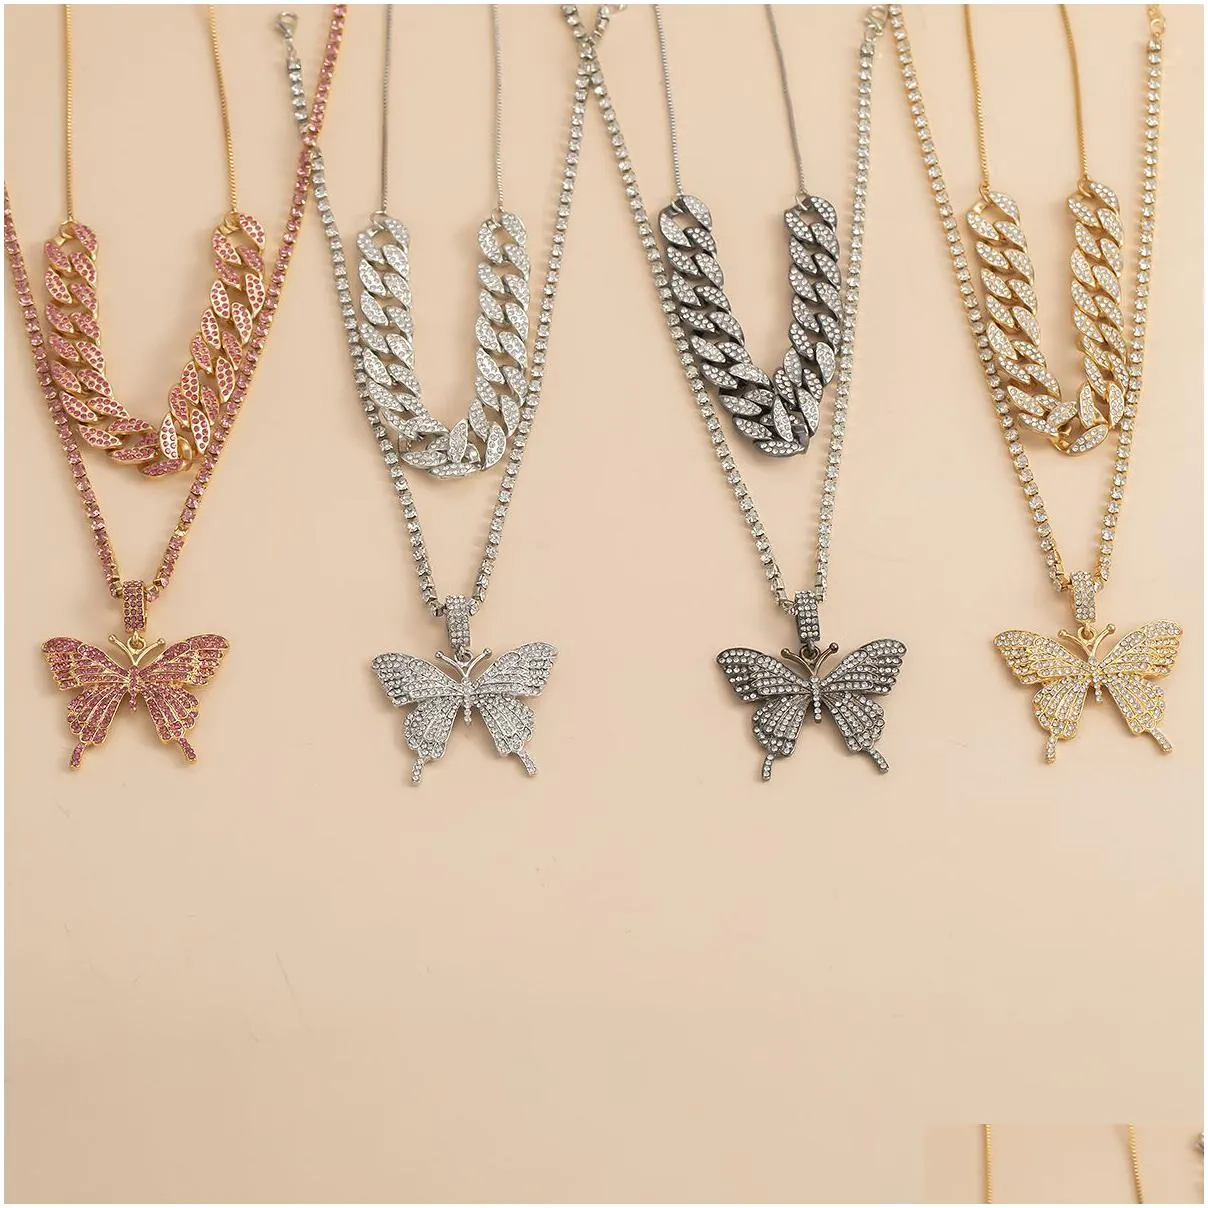 Pendant Necklaces Luxury Women Necklaces Iced Out Cuban Link Chains Butterfly Pendant Crystal Rhinestone Animal Hip Hop Jewelry Gold P Dh9Tz